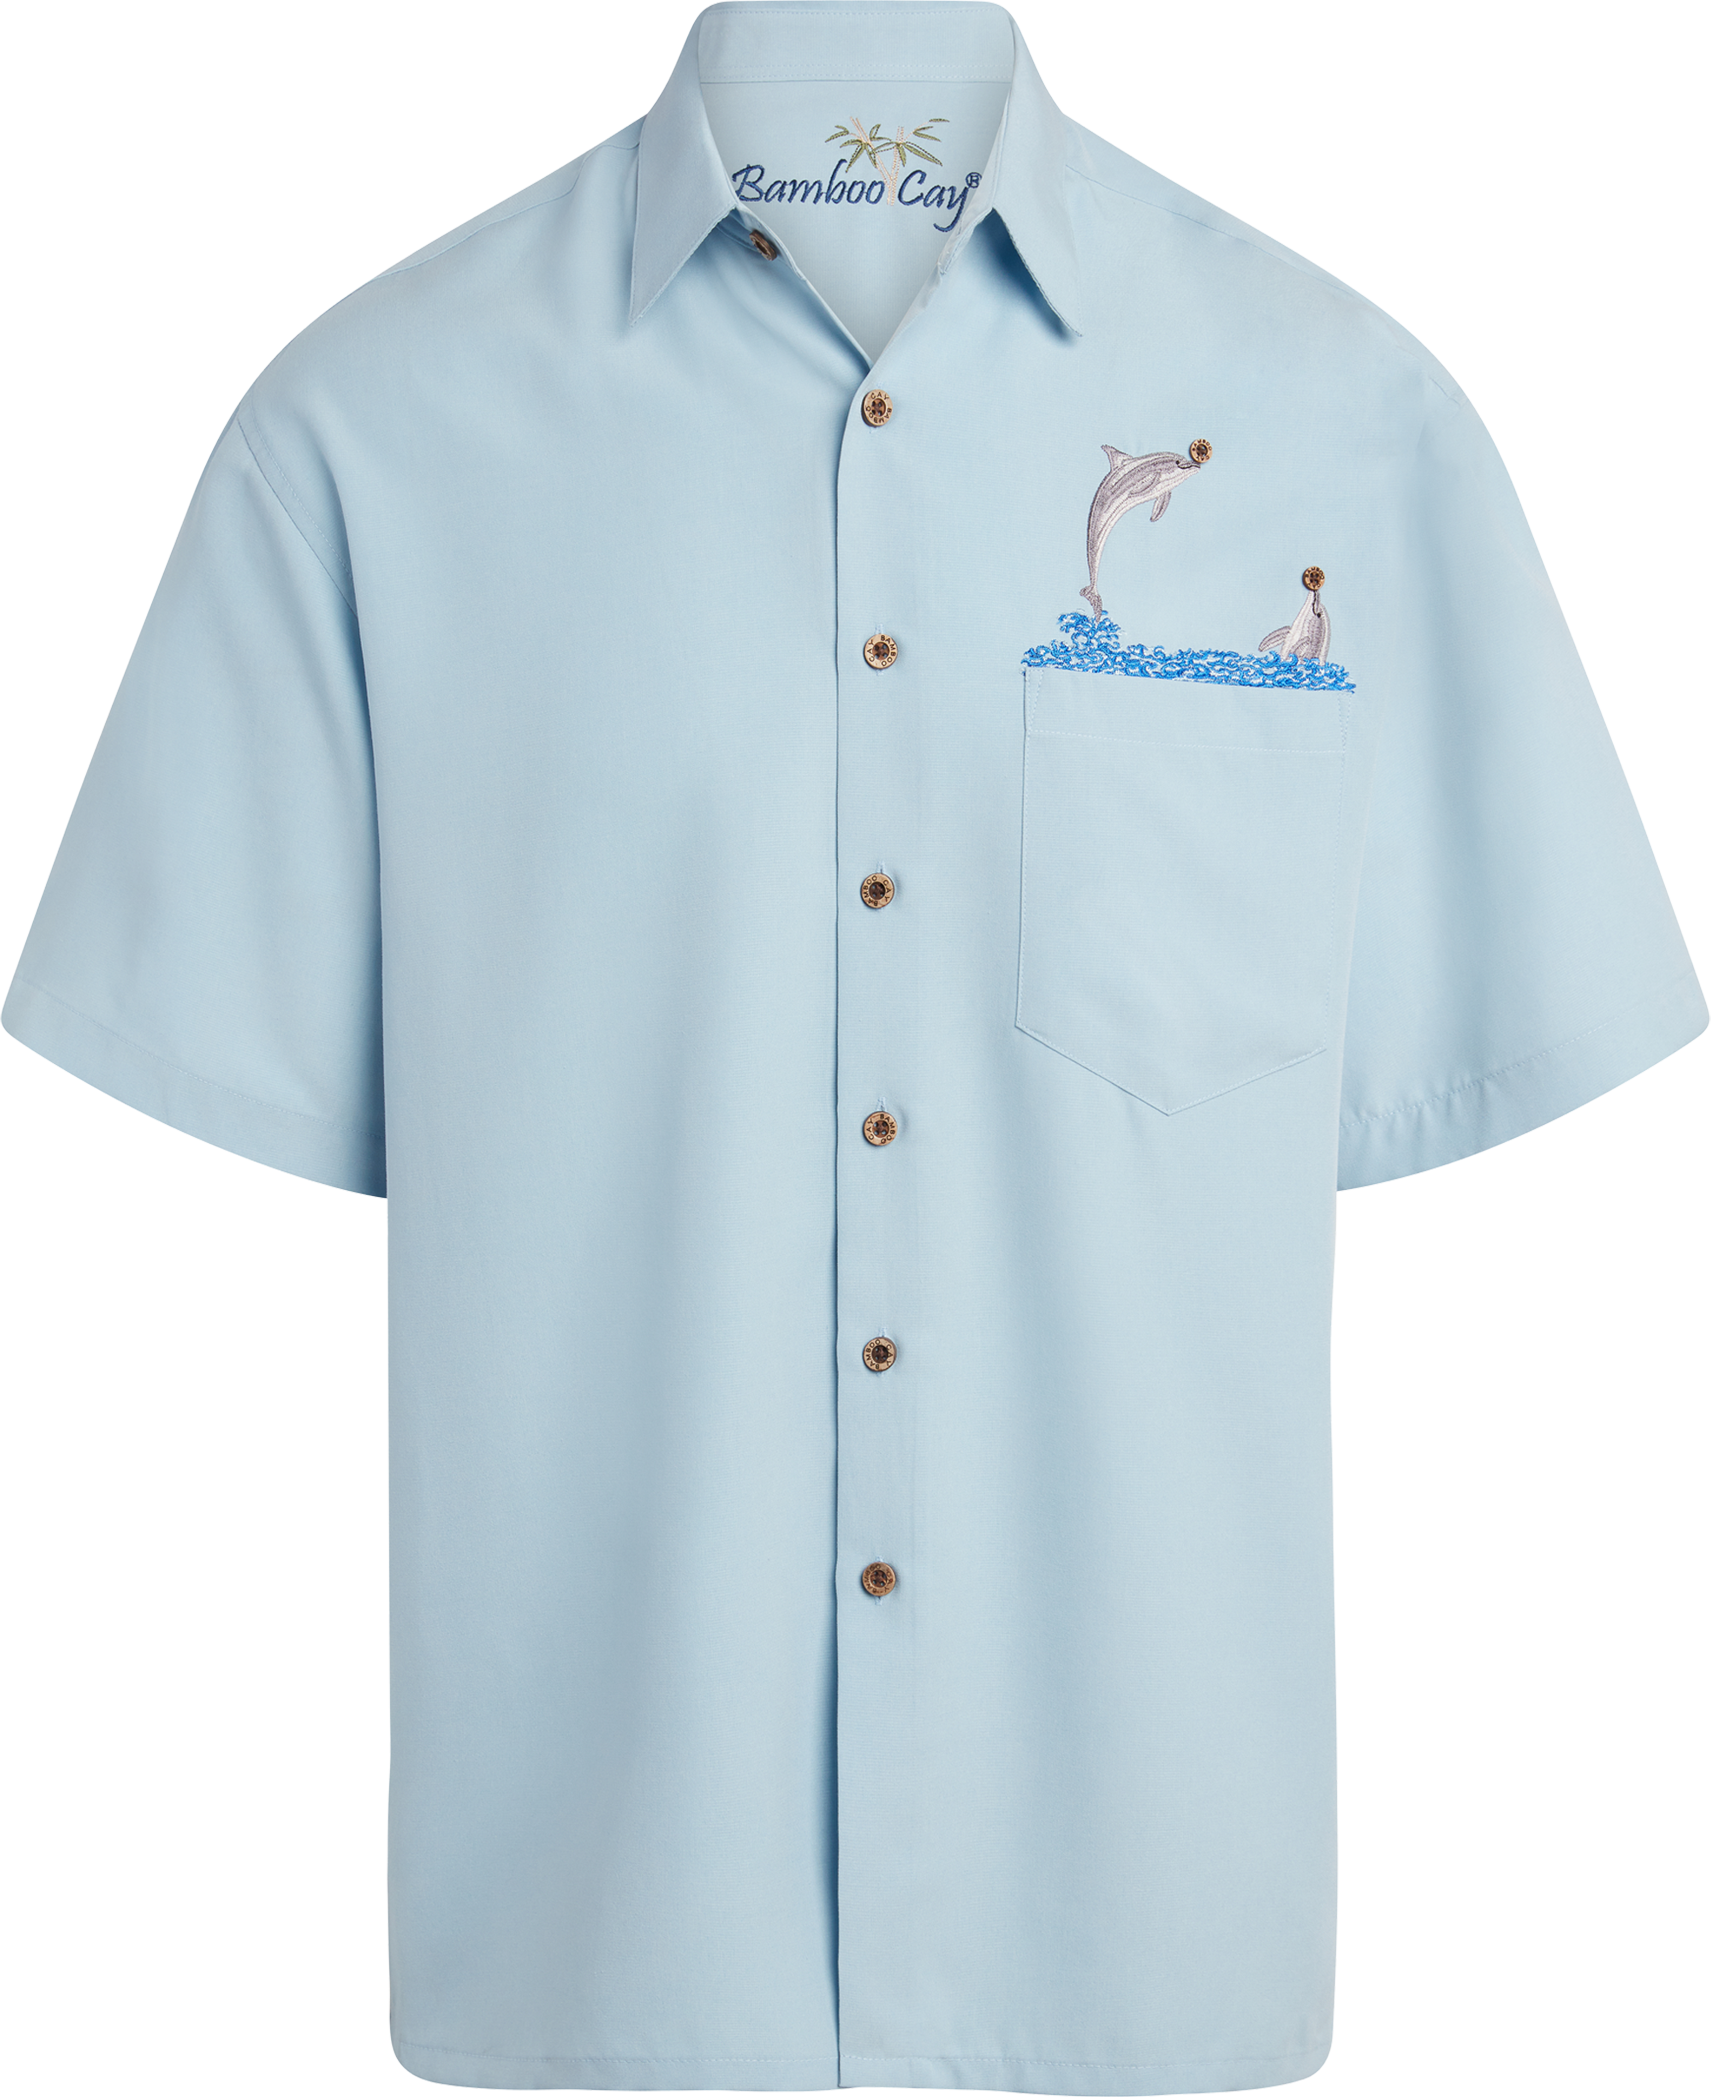 Bamboo Cay Tropical dolphins short sleeve button up pocket shirt blue